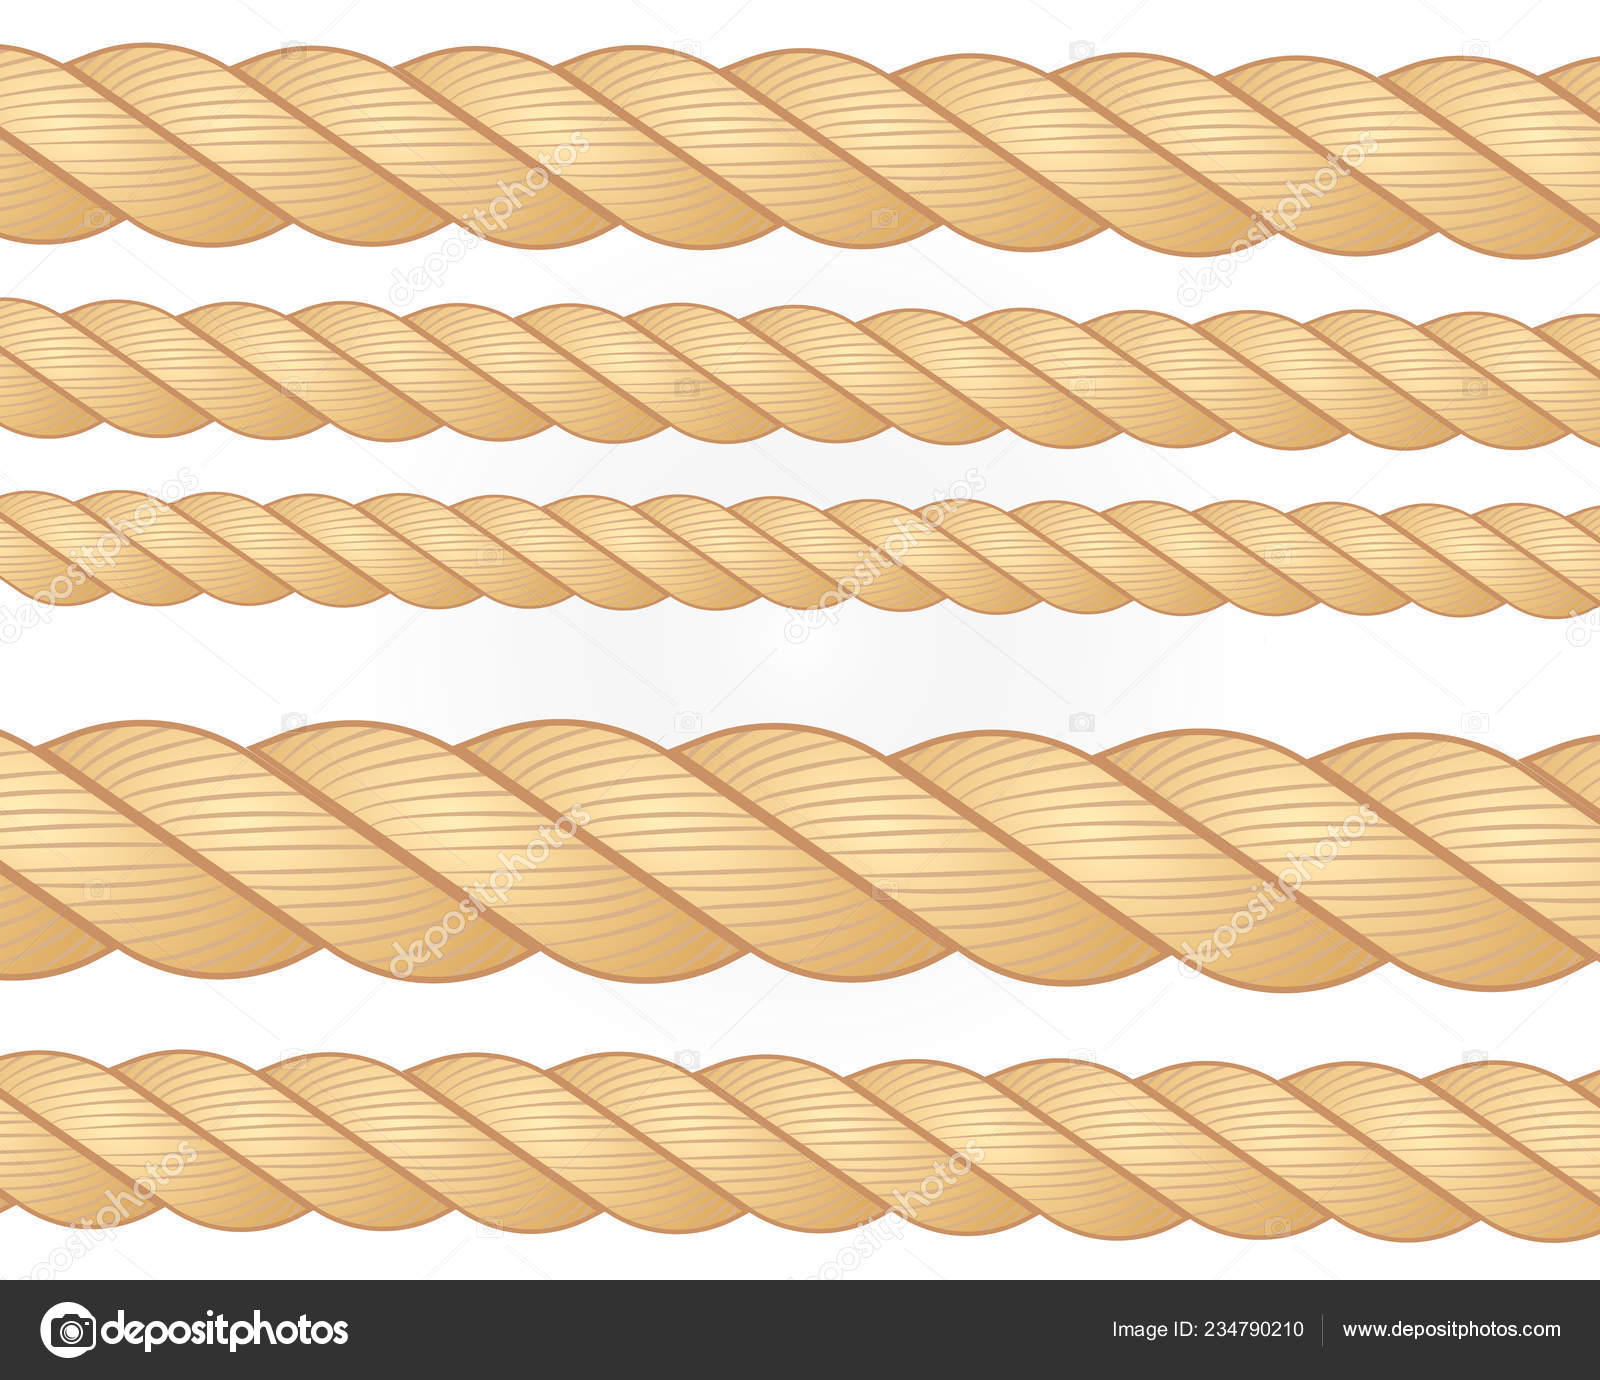 Nautical Rope Square Rope Frames Cord Borders Sailing Vector